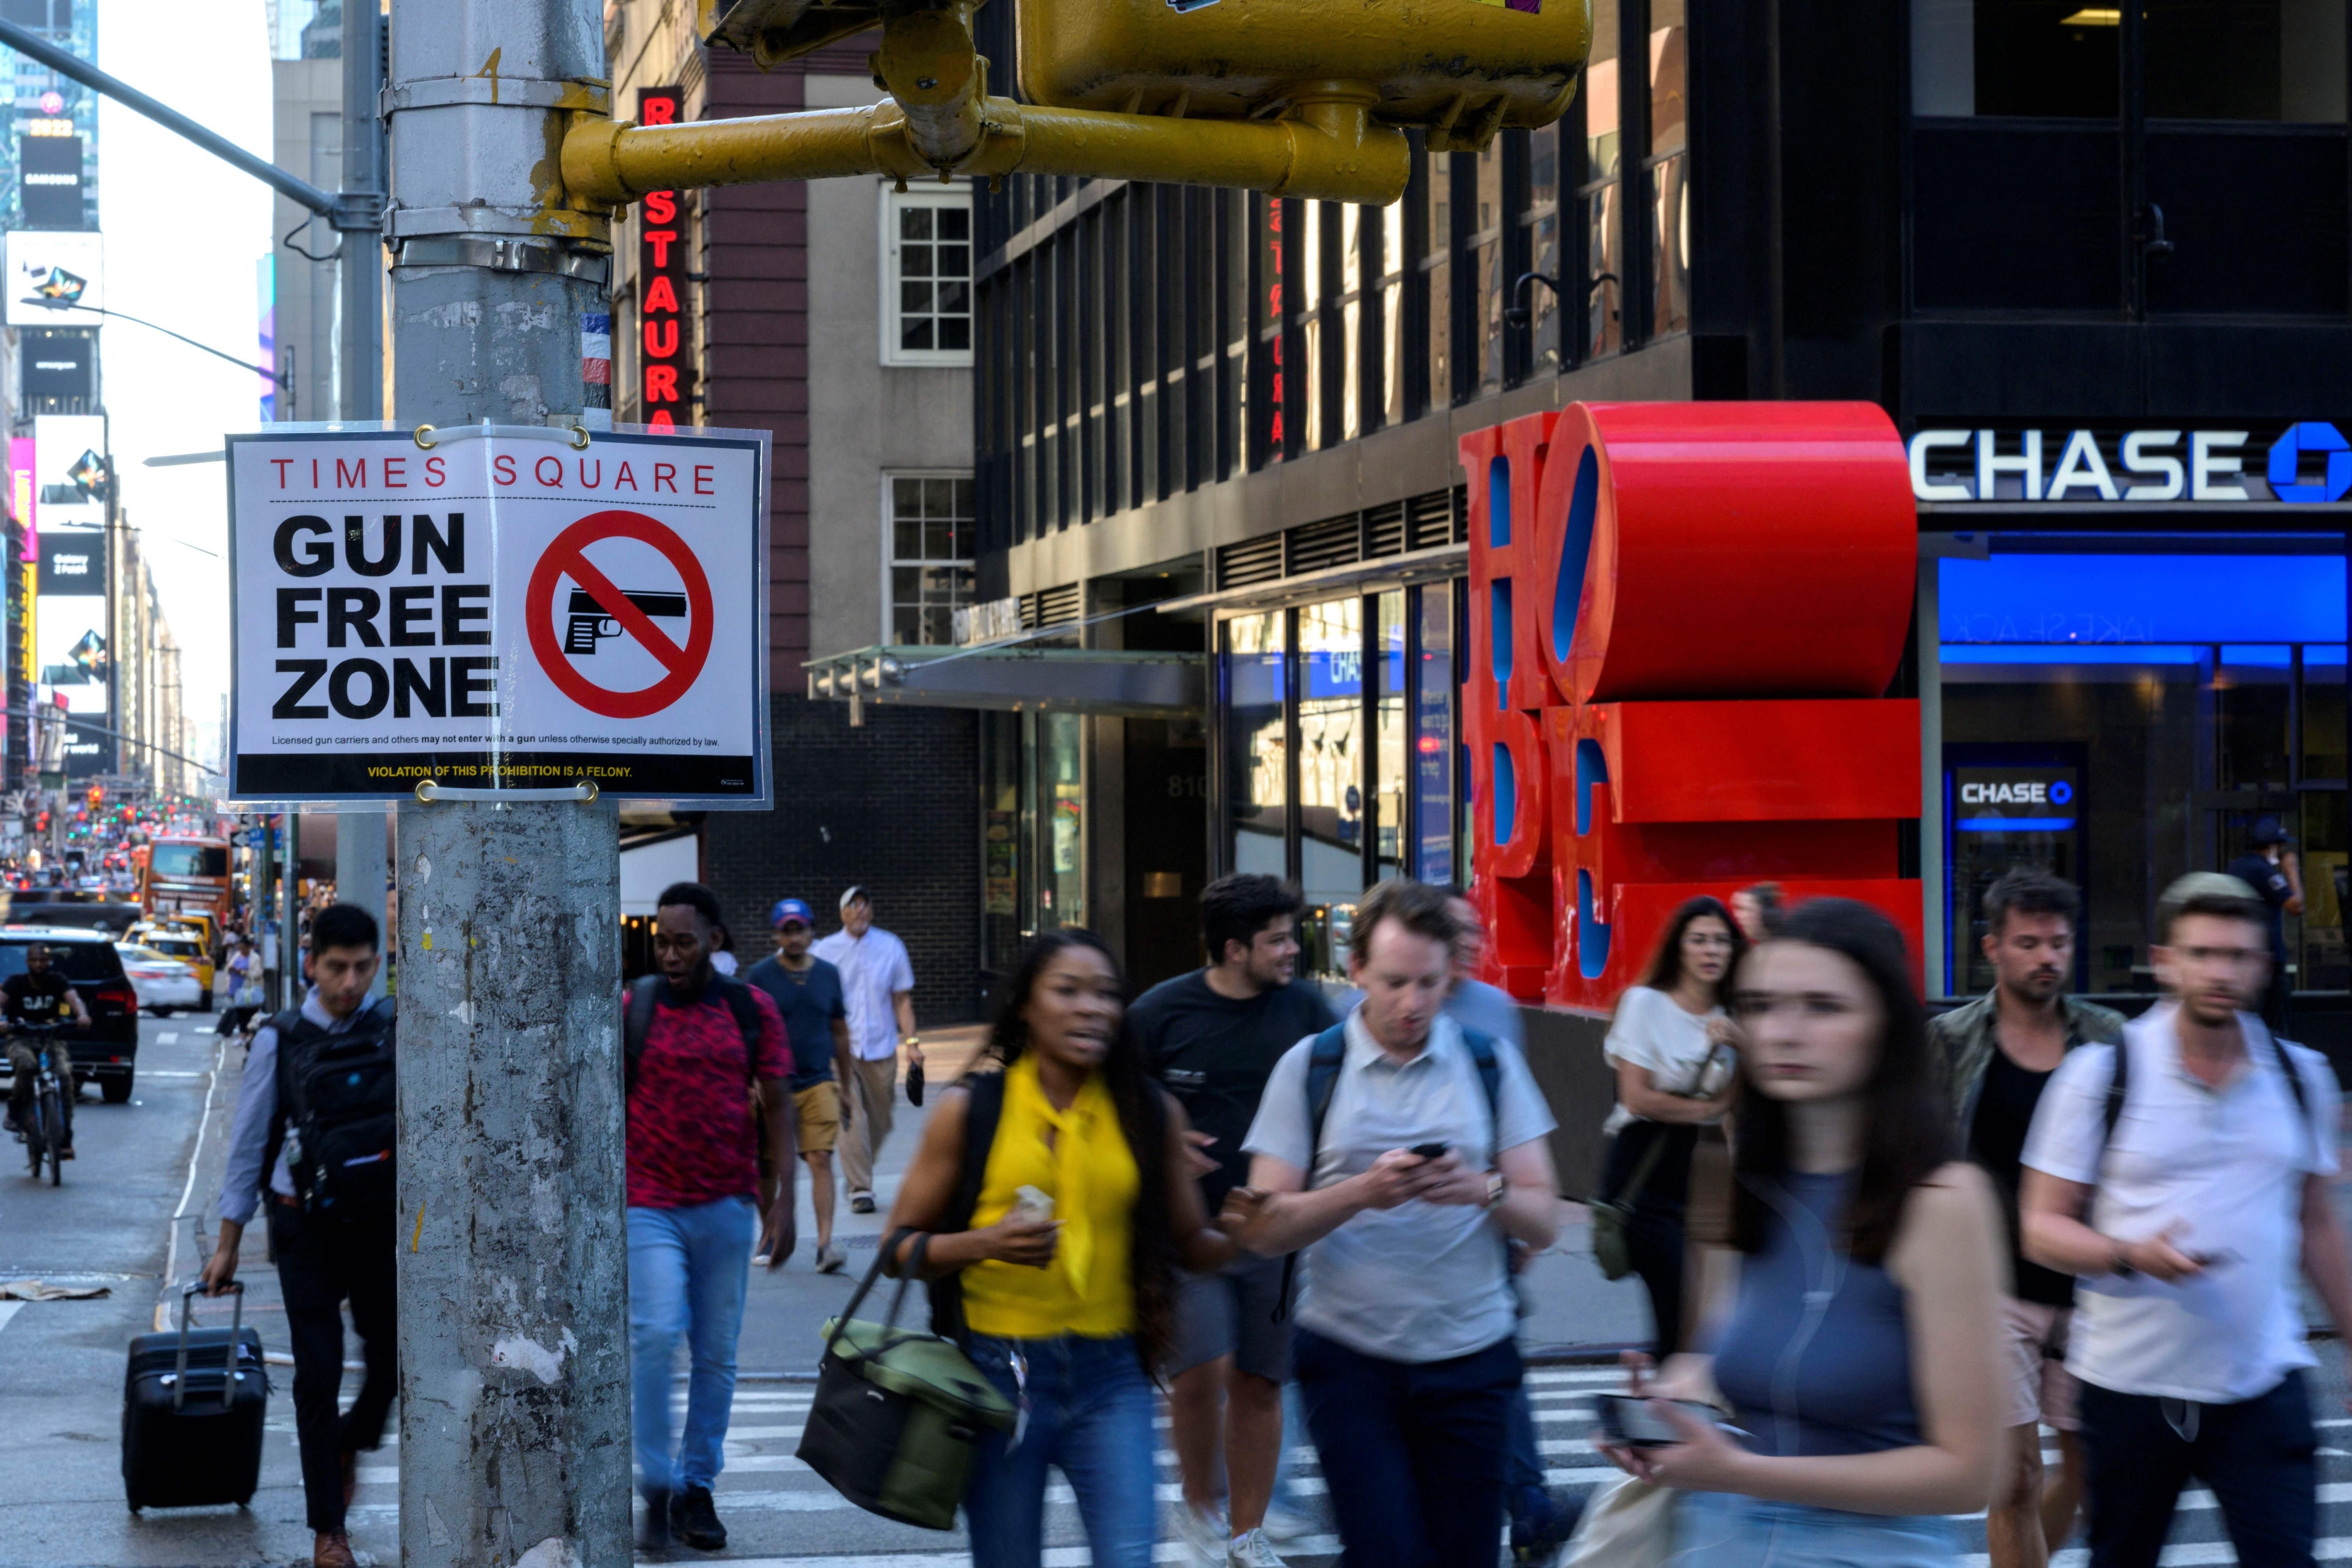 Gun Free Zone sign in Times Square 